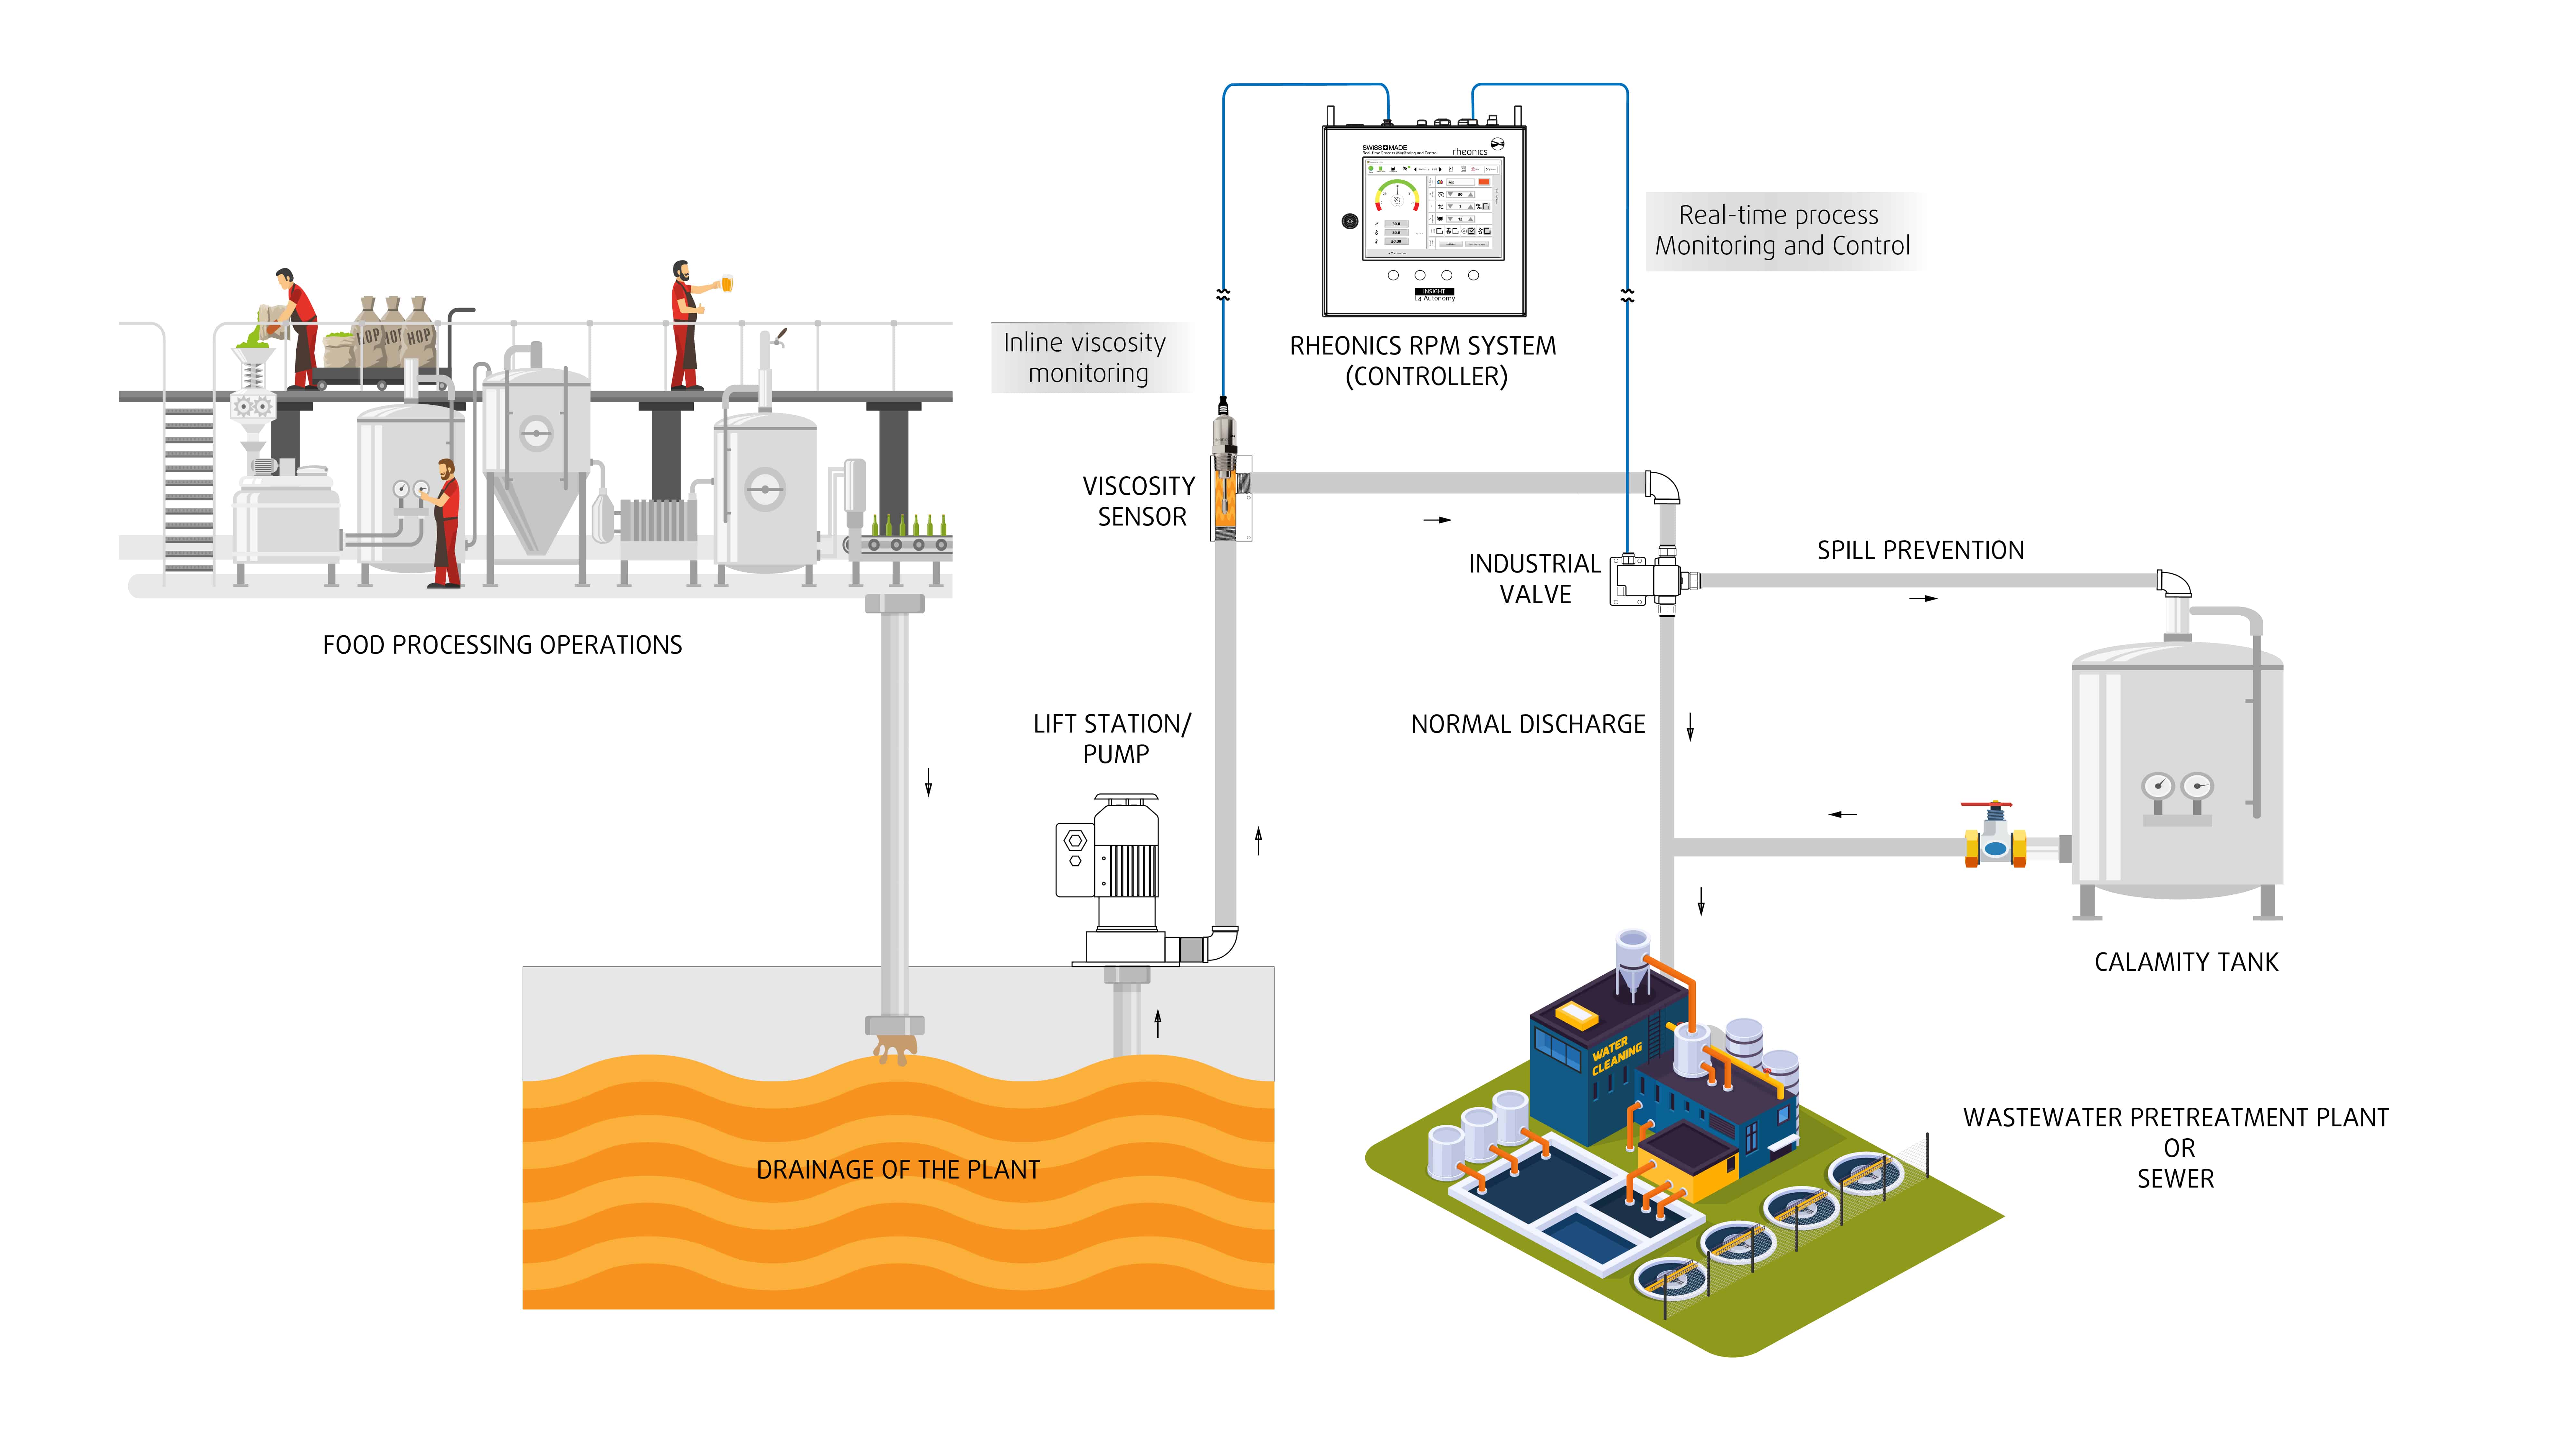 Calamity detection and automatic diversion of non-compliant discharge to calamity tanks - wastewater viscosity monitoring with inline viscosity sensors